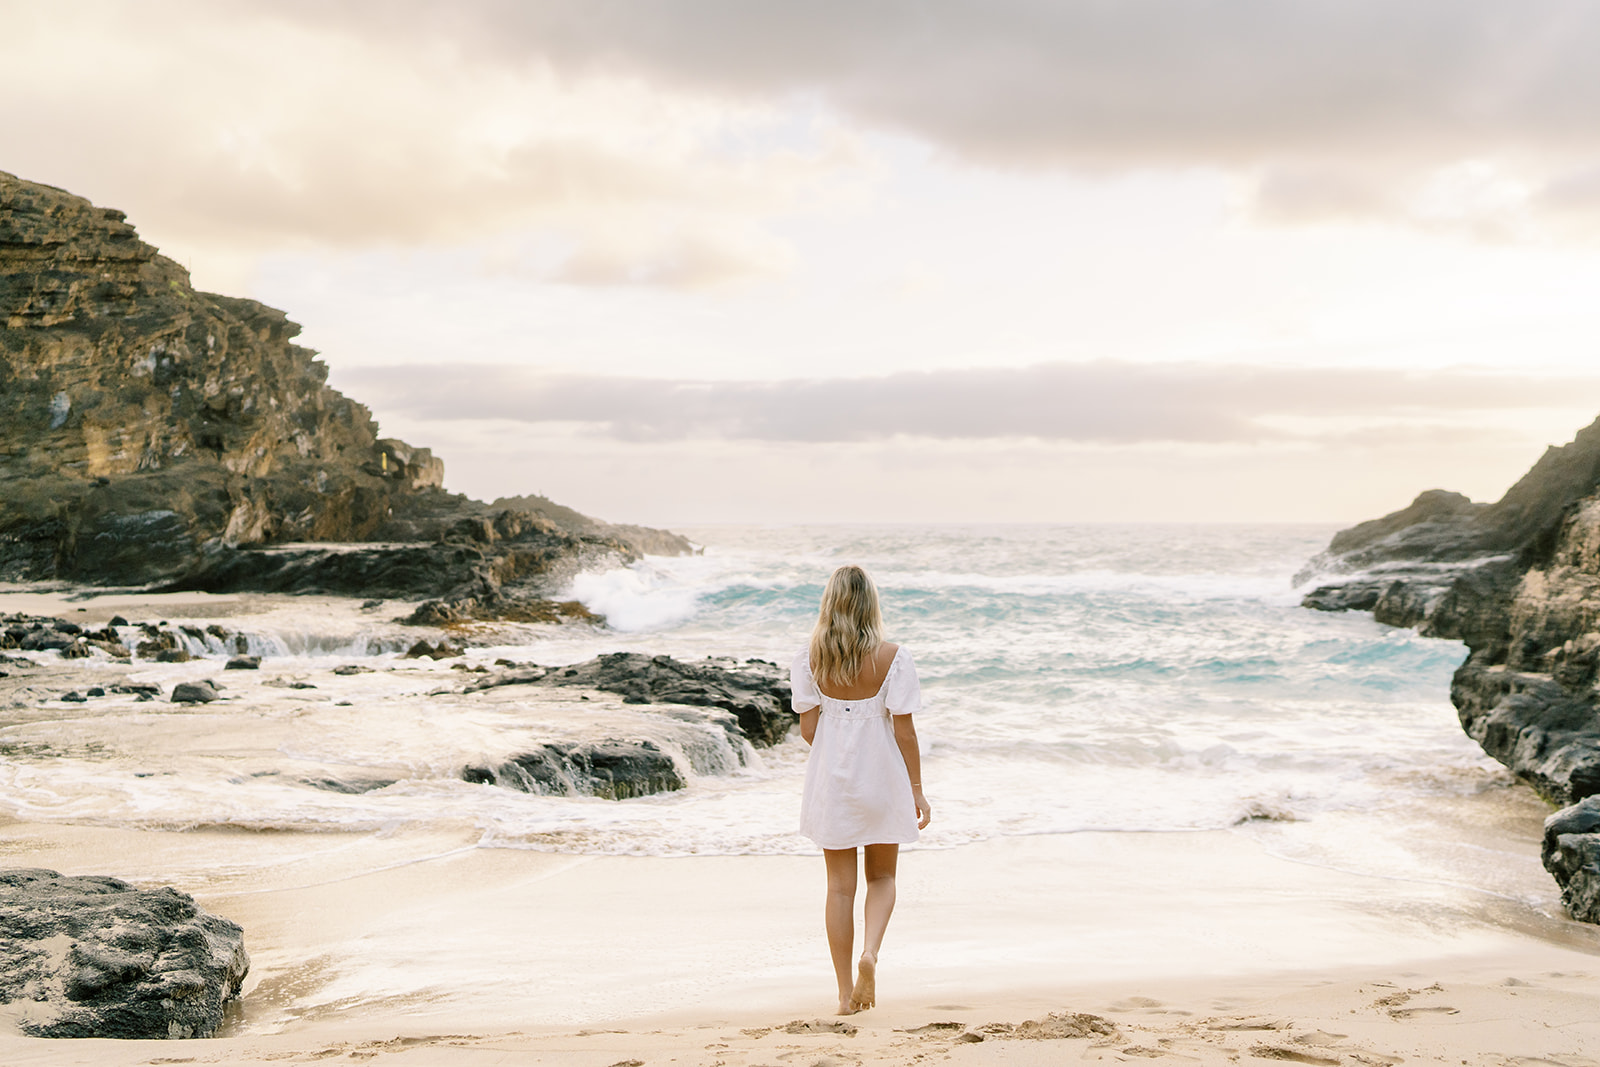 A woman in a white dress walking towards the ocean on a sandy beach with rocky cliffs on the side, Sunrise Portrait